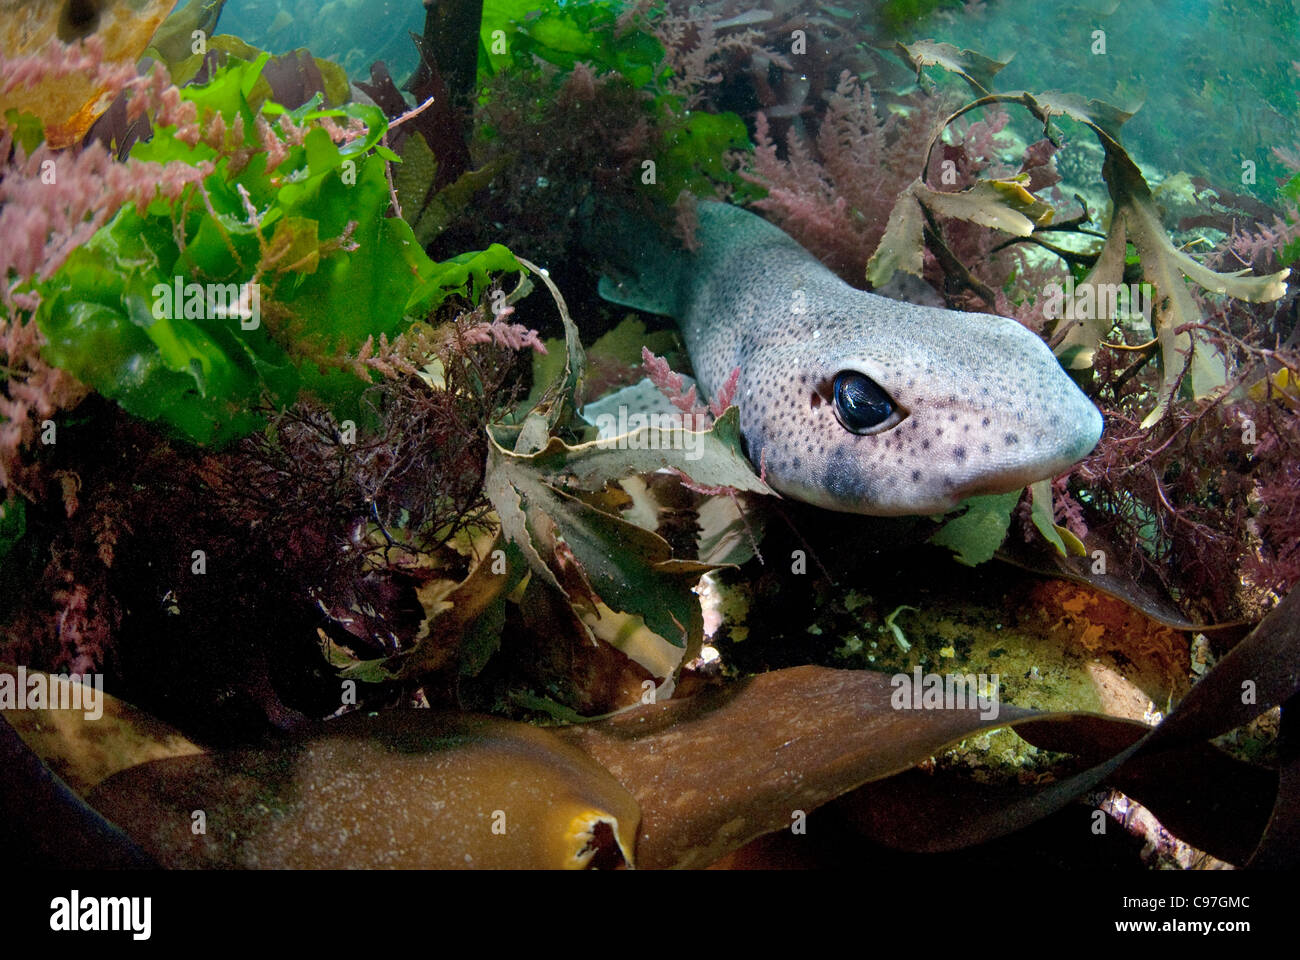 A Lesser Spotted Catshark (Scyliorhinus canicula) rests in shallow waters, England. Stock Photo